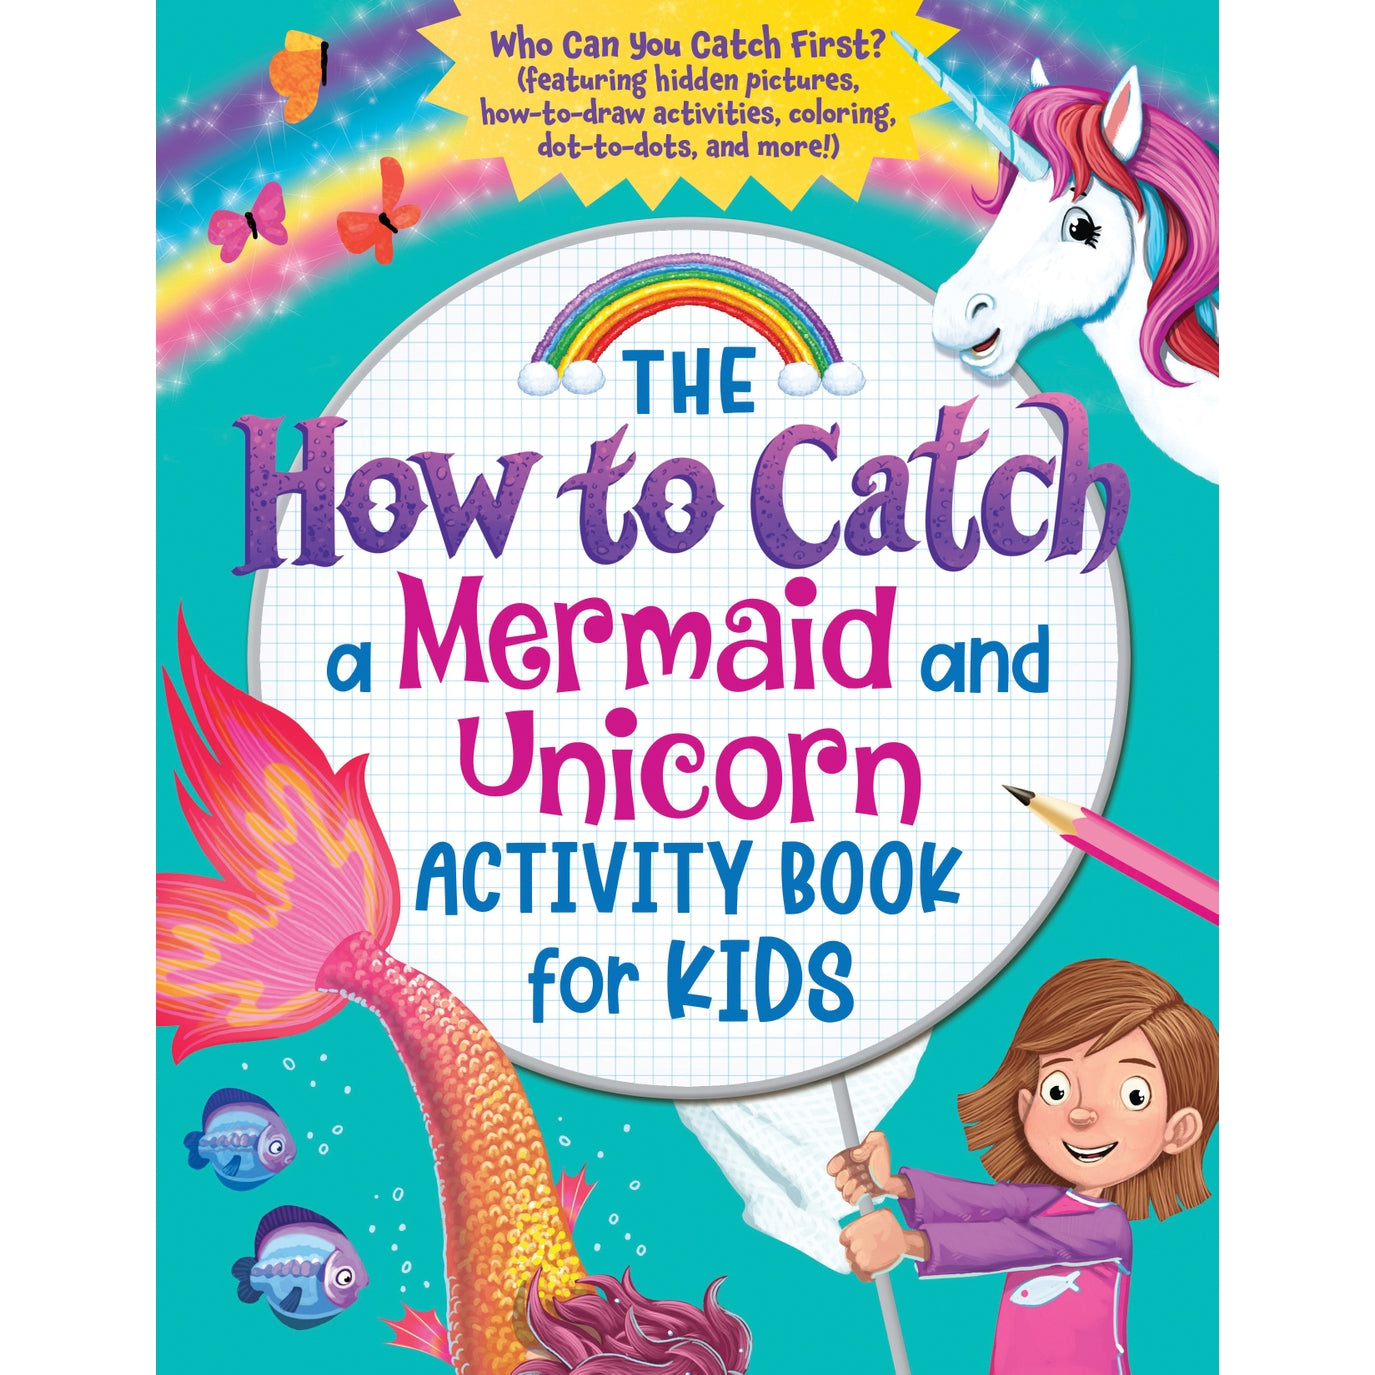 How to Catch a Mermaid and Unicorn Activity Book